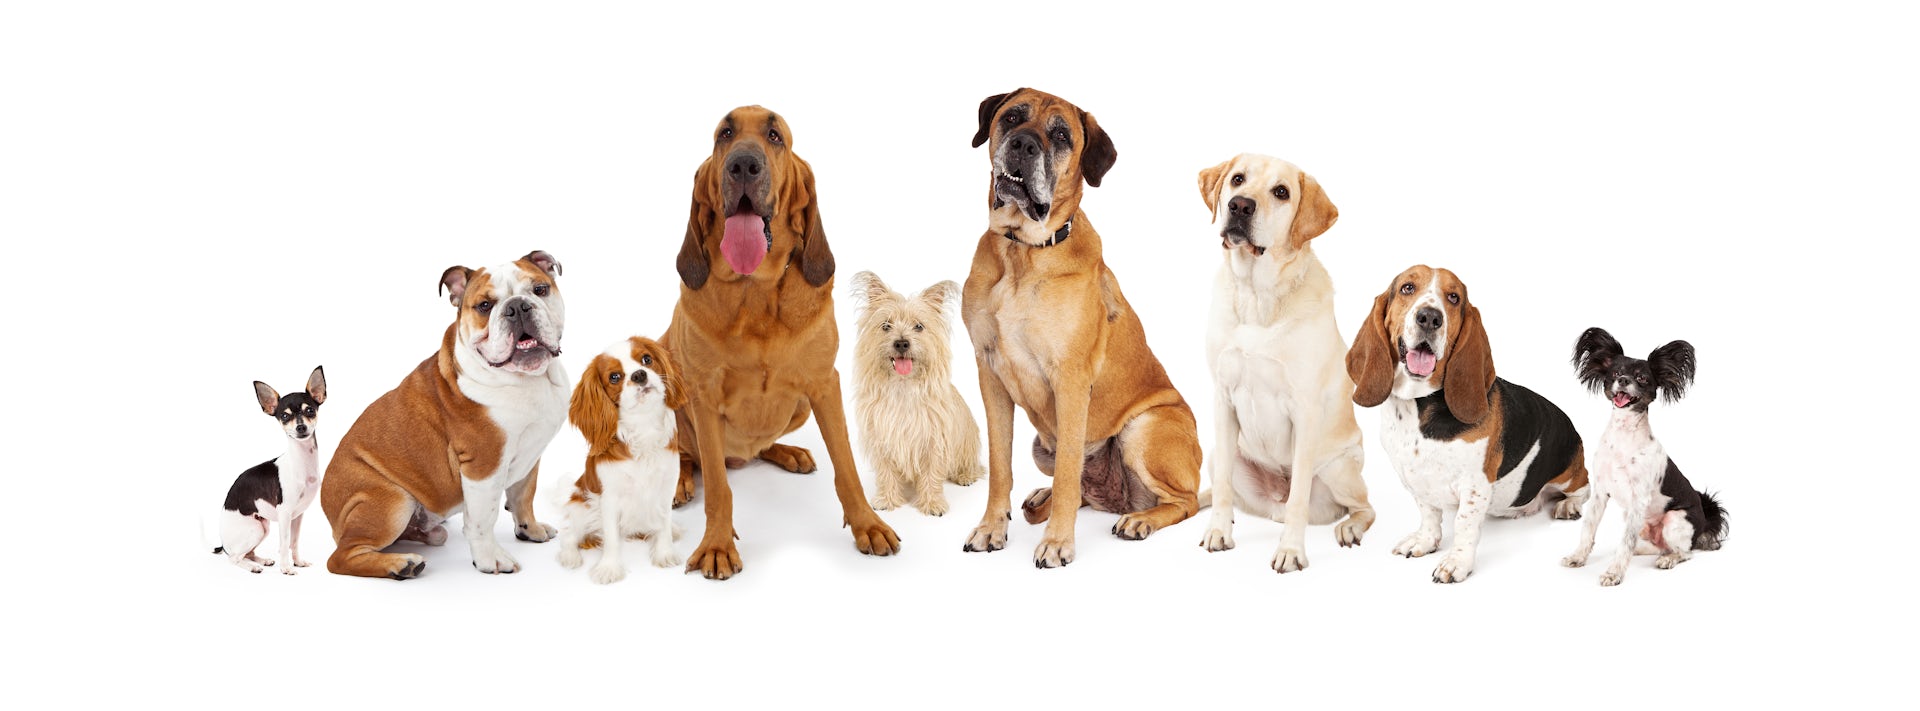 dog breeds and images